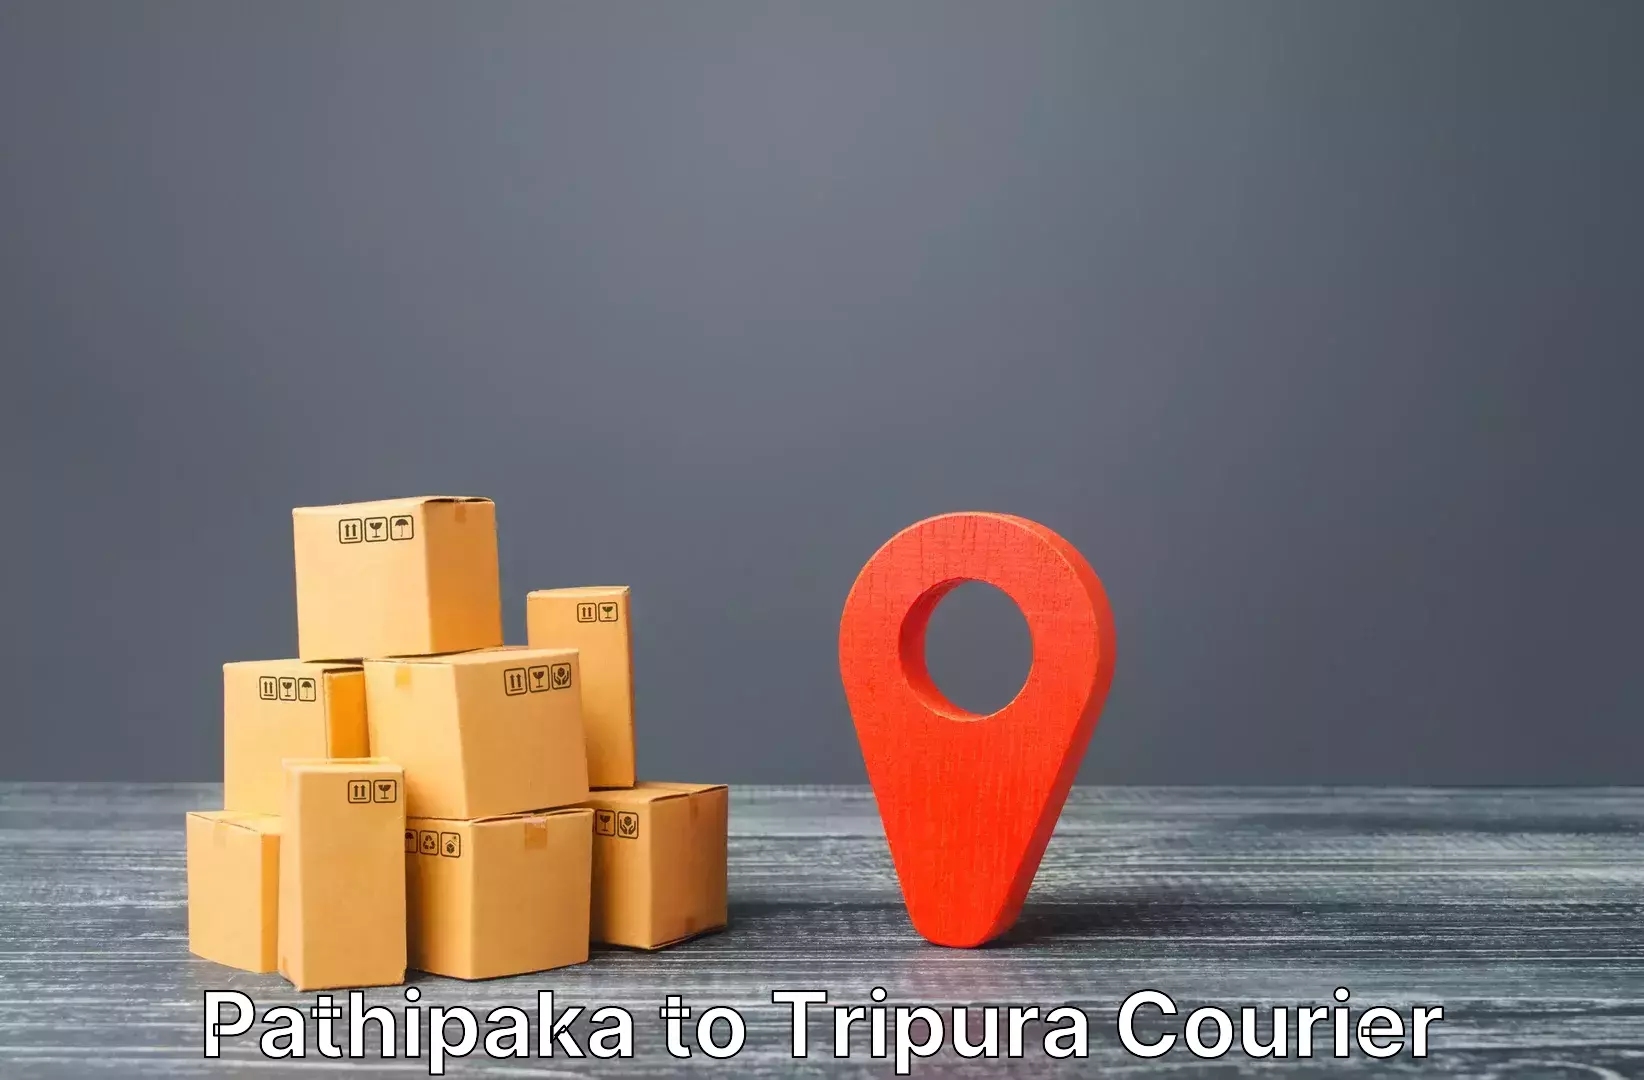 Personal effects shipping Pathipaka to Udaipur Tripura